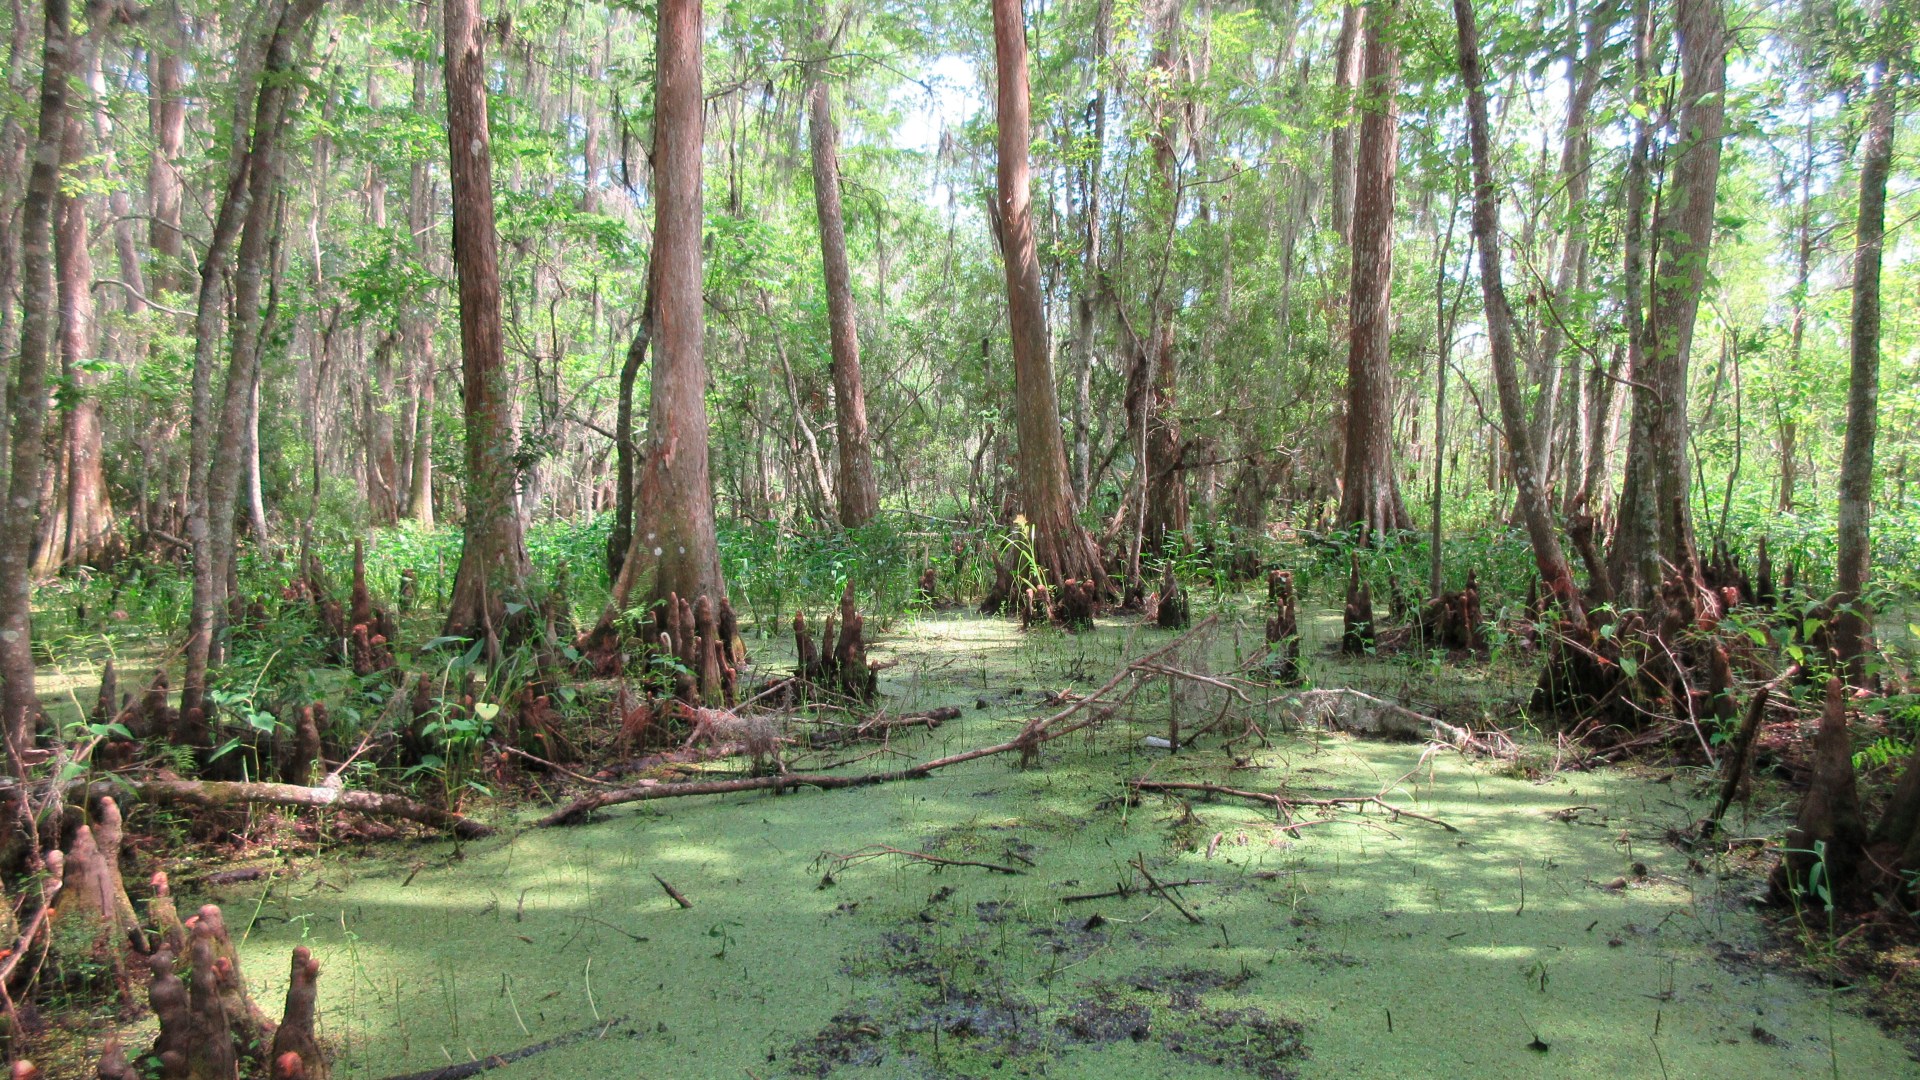 The verdant landscape of the Barataria Preserve, part of the Jean Lafitte National Historical Park and Preserve in Marrero, Louisiana, just outside of New Orleans